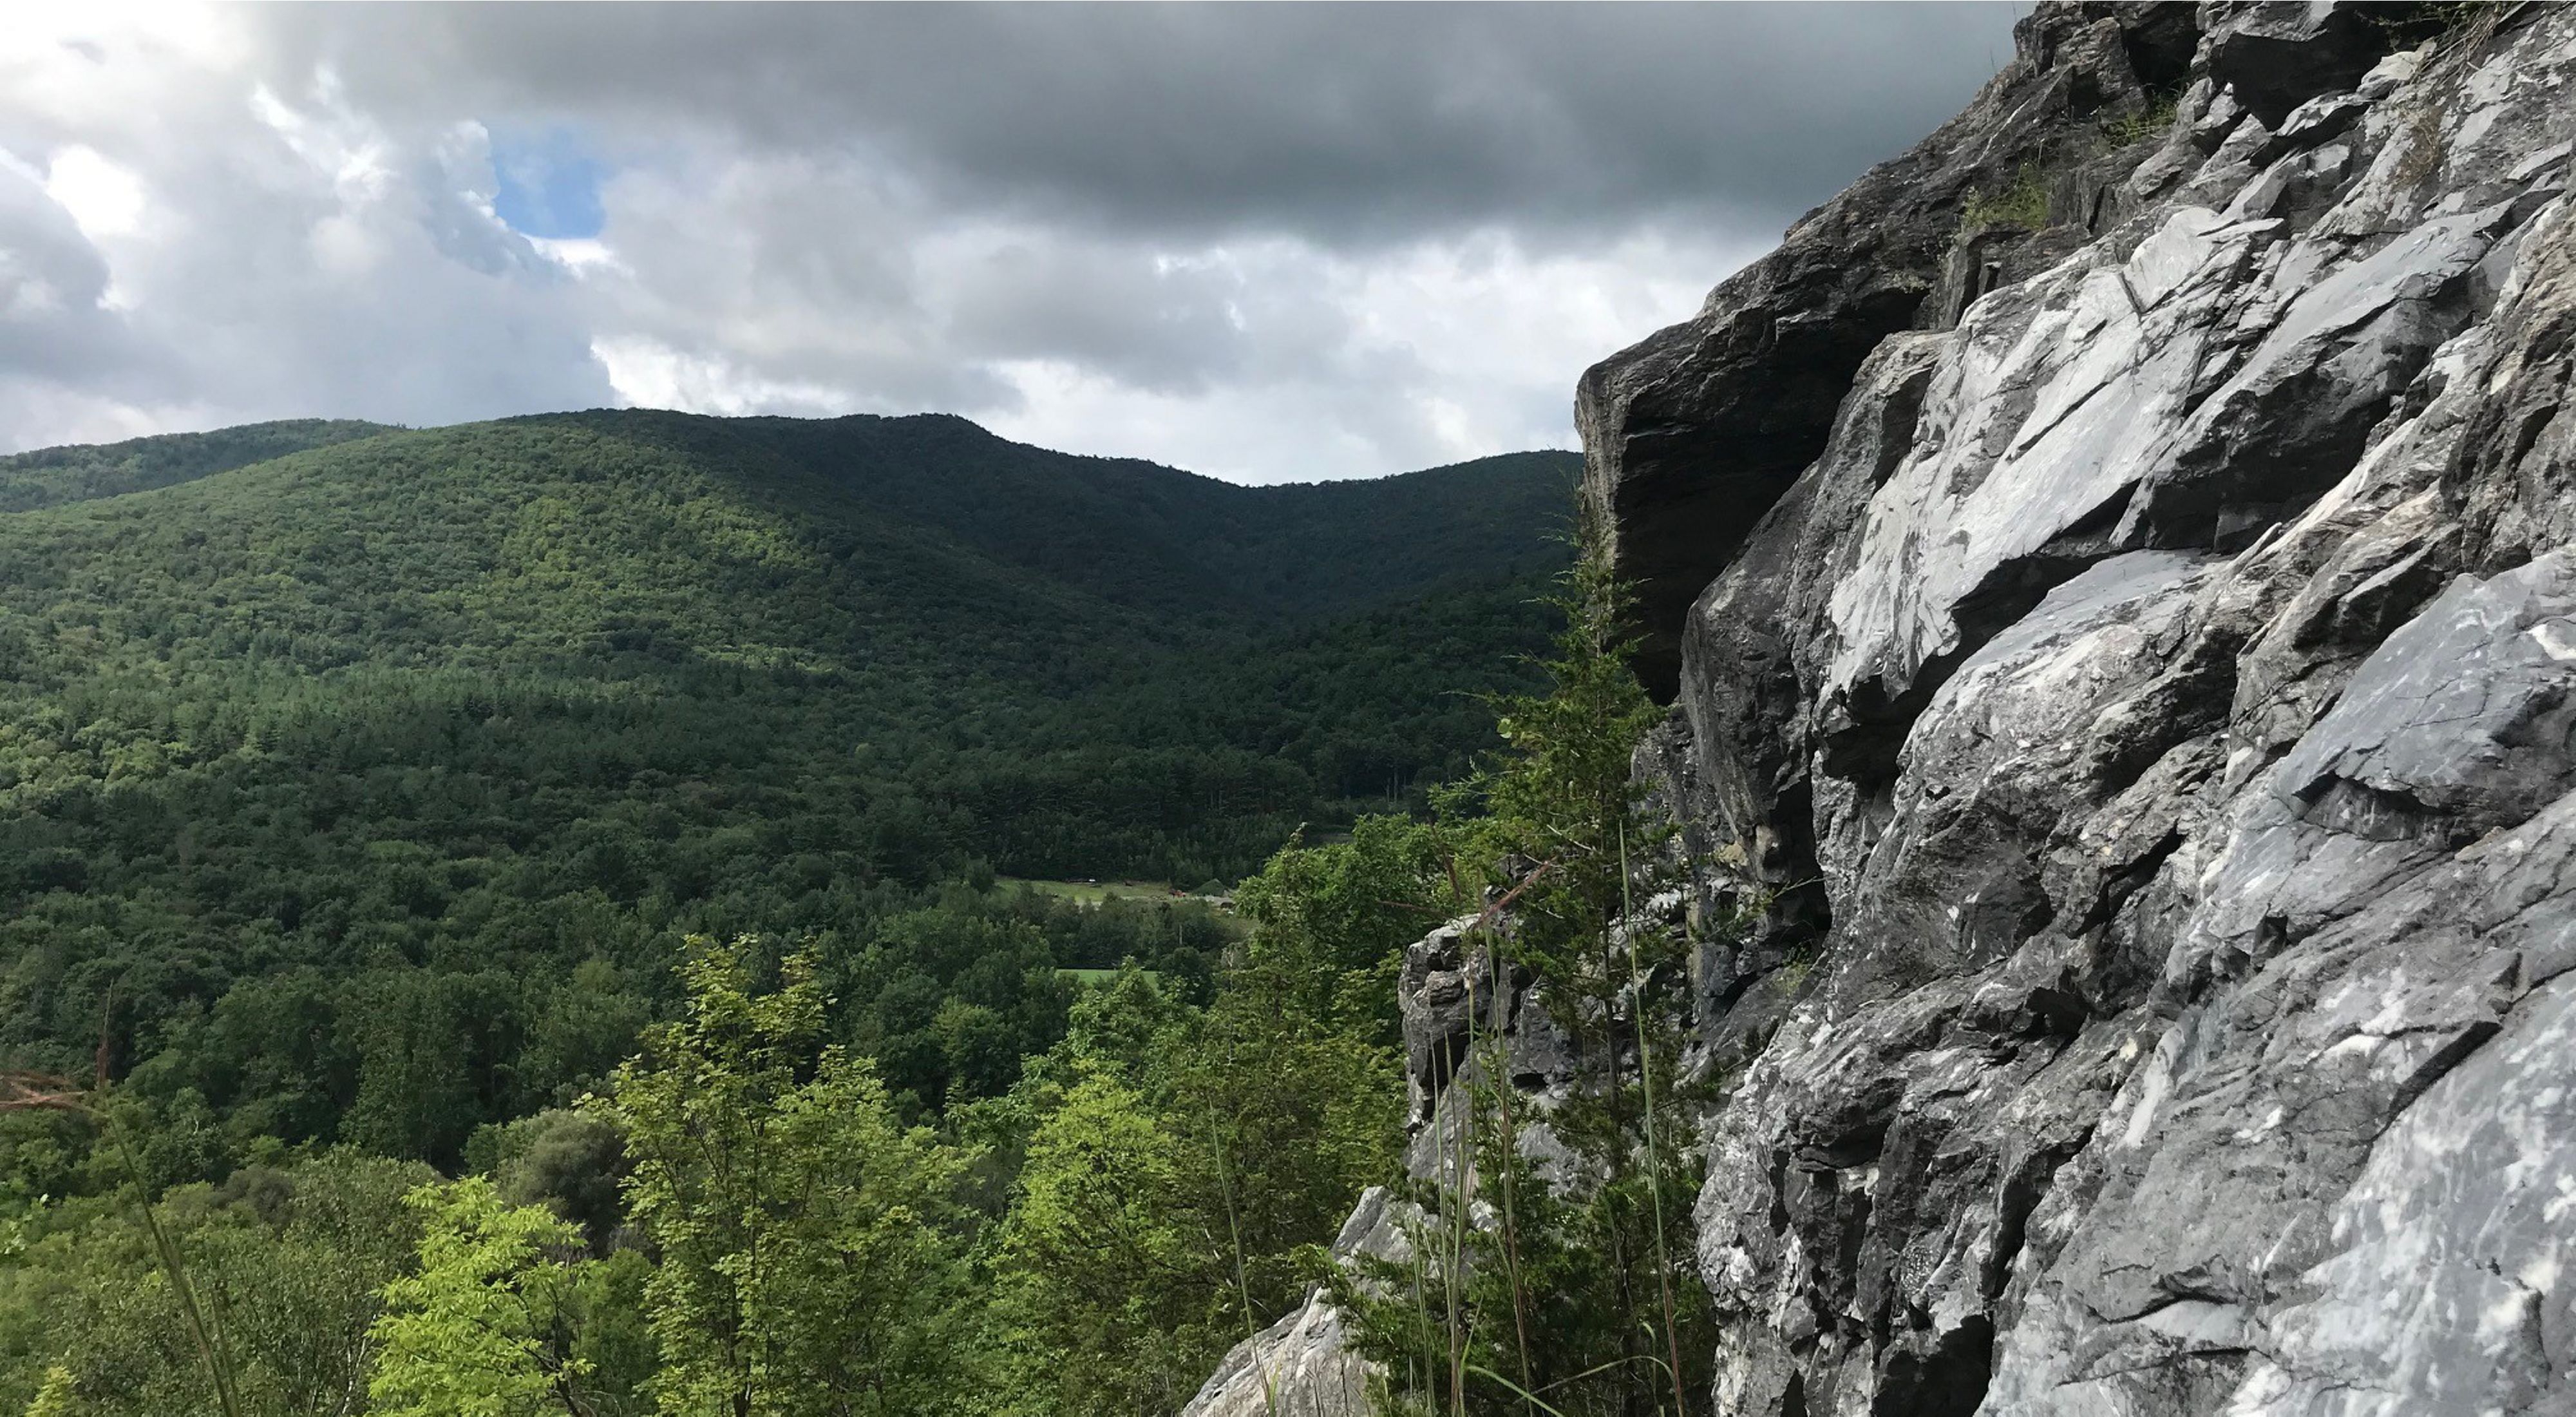 Image from the top of Quarry Hill Natural Area in Pownal, VT.